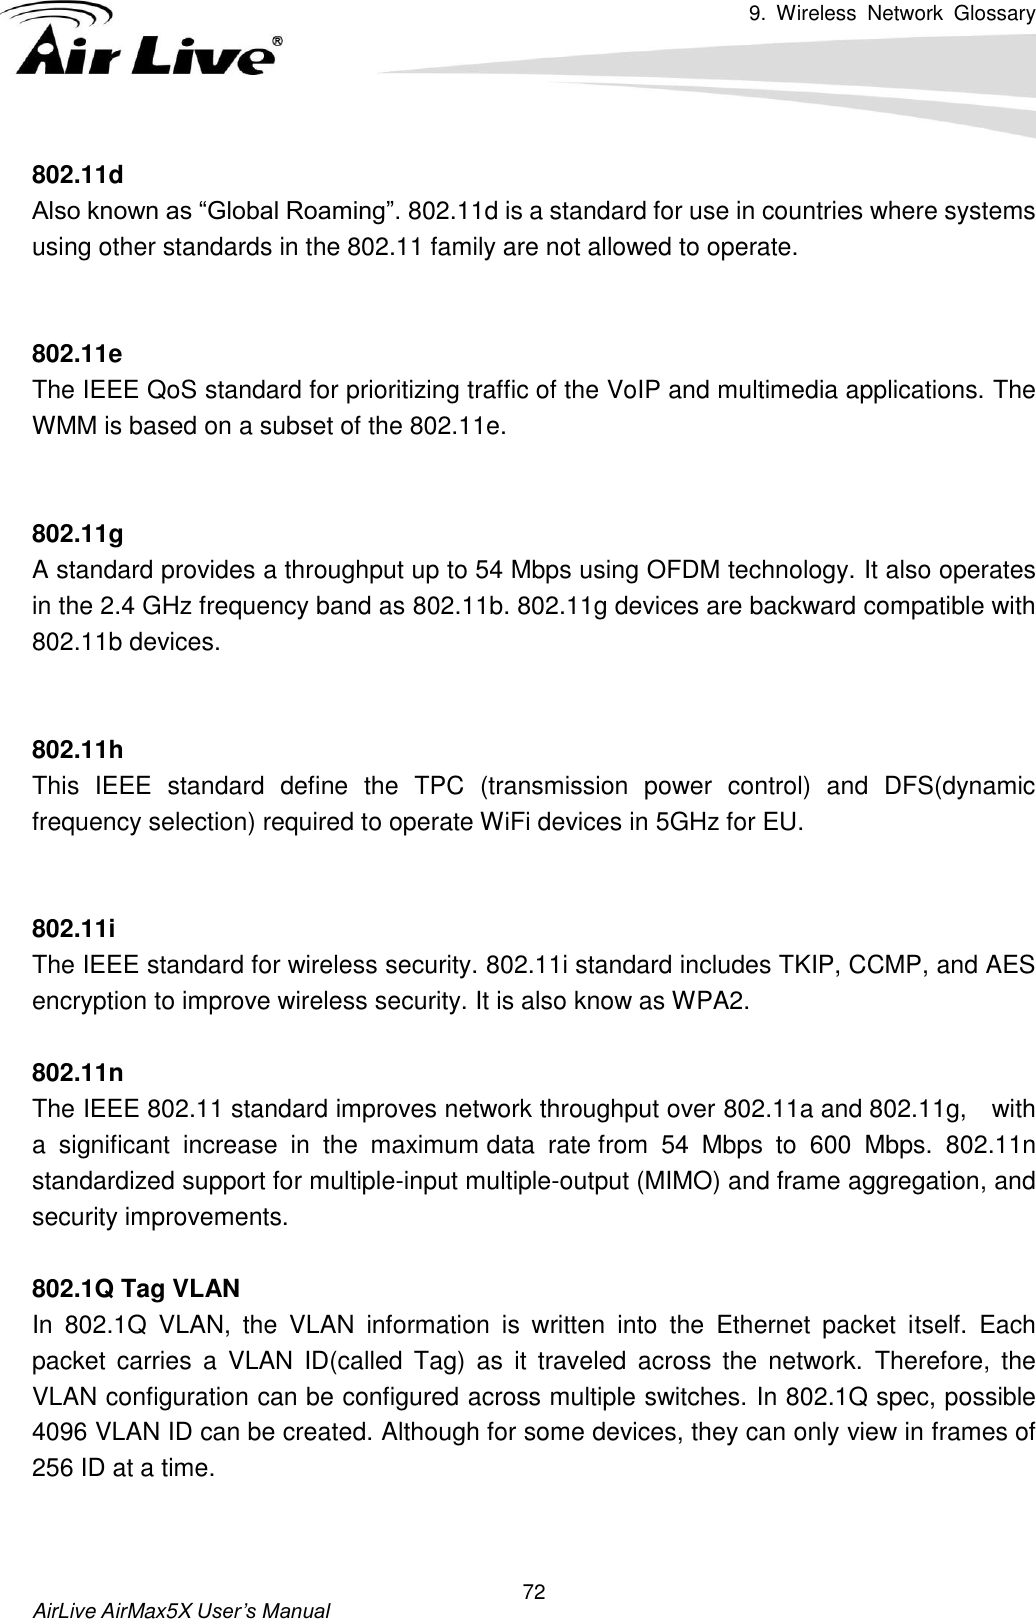 9.  Wireless  Network  Glossary       AirLive AirMax5X User’s Manual 72 802.11d Also known as “Global Roaming”. 802.11d is a standard for use in countries where systems using other standards in the 802.11 family are not allowed to operate.   802.11e The IEEE QoS standard for prioritizing traffic of the VoIP and multimedia applications. The WMM is based on a subset of the 802.11e.   802.11g A standard provides a throughput up to 54 Mbps using OFDM technology. It also operates in the 2.4 GHz frequency band as 802.11b. 802.11g devices are backward compatible with 802.11b devices.   802.11h This  IEEE  standard  define  the  TPC  (transmission  power  control)  and  DFS(dynamic frequency selection) required to operate WiFi devices in 5GHz for EU.   802.11i The IEEE standard for wireless security. 802.11i standard includes TKIP, CCMP, and AES encryption to improve wireless security. It is also know as WPA2.  802.11n The IEEE 802.11 standard improves network throughput over 802.11a and 802.11g,    with a  significant  increase  in  the  maximum data  rate from  54  Mbps  to  600  Mbps.  802.11n standardized support for multiple-input multiple-output (MIMO) and frame aggregation, and security improvements.  802.1Q Tag VLAN In  802.1Q  VLAN,  the  VLAN  information  is  written  into  the  Ethernet  packet  itself.  Each packet  carries  a  VLAN  ID(called  Tag)  as  it  traveled  across  the  network.  Therefore,  the VLAN configuration can be configured across multiple switches. In 802.1Q spec, possible 4096 VLAN ID can be created. Although for some devices, they can only view in frames of 256 ID at a time.   